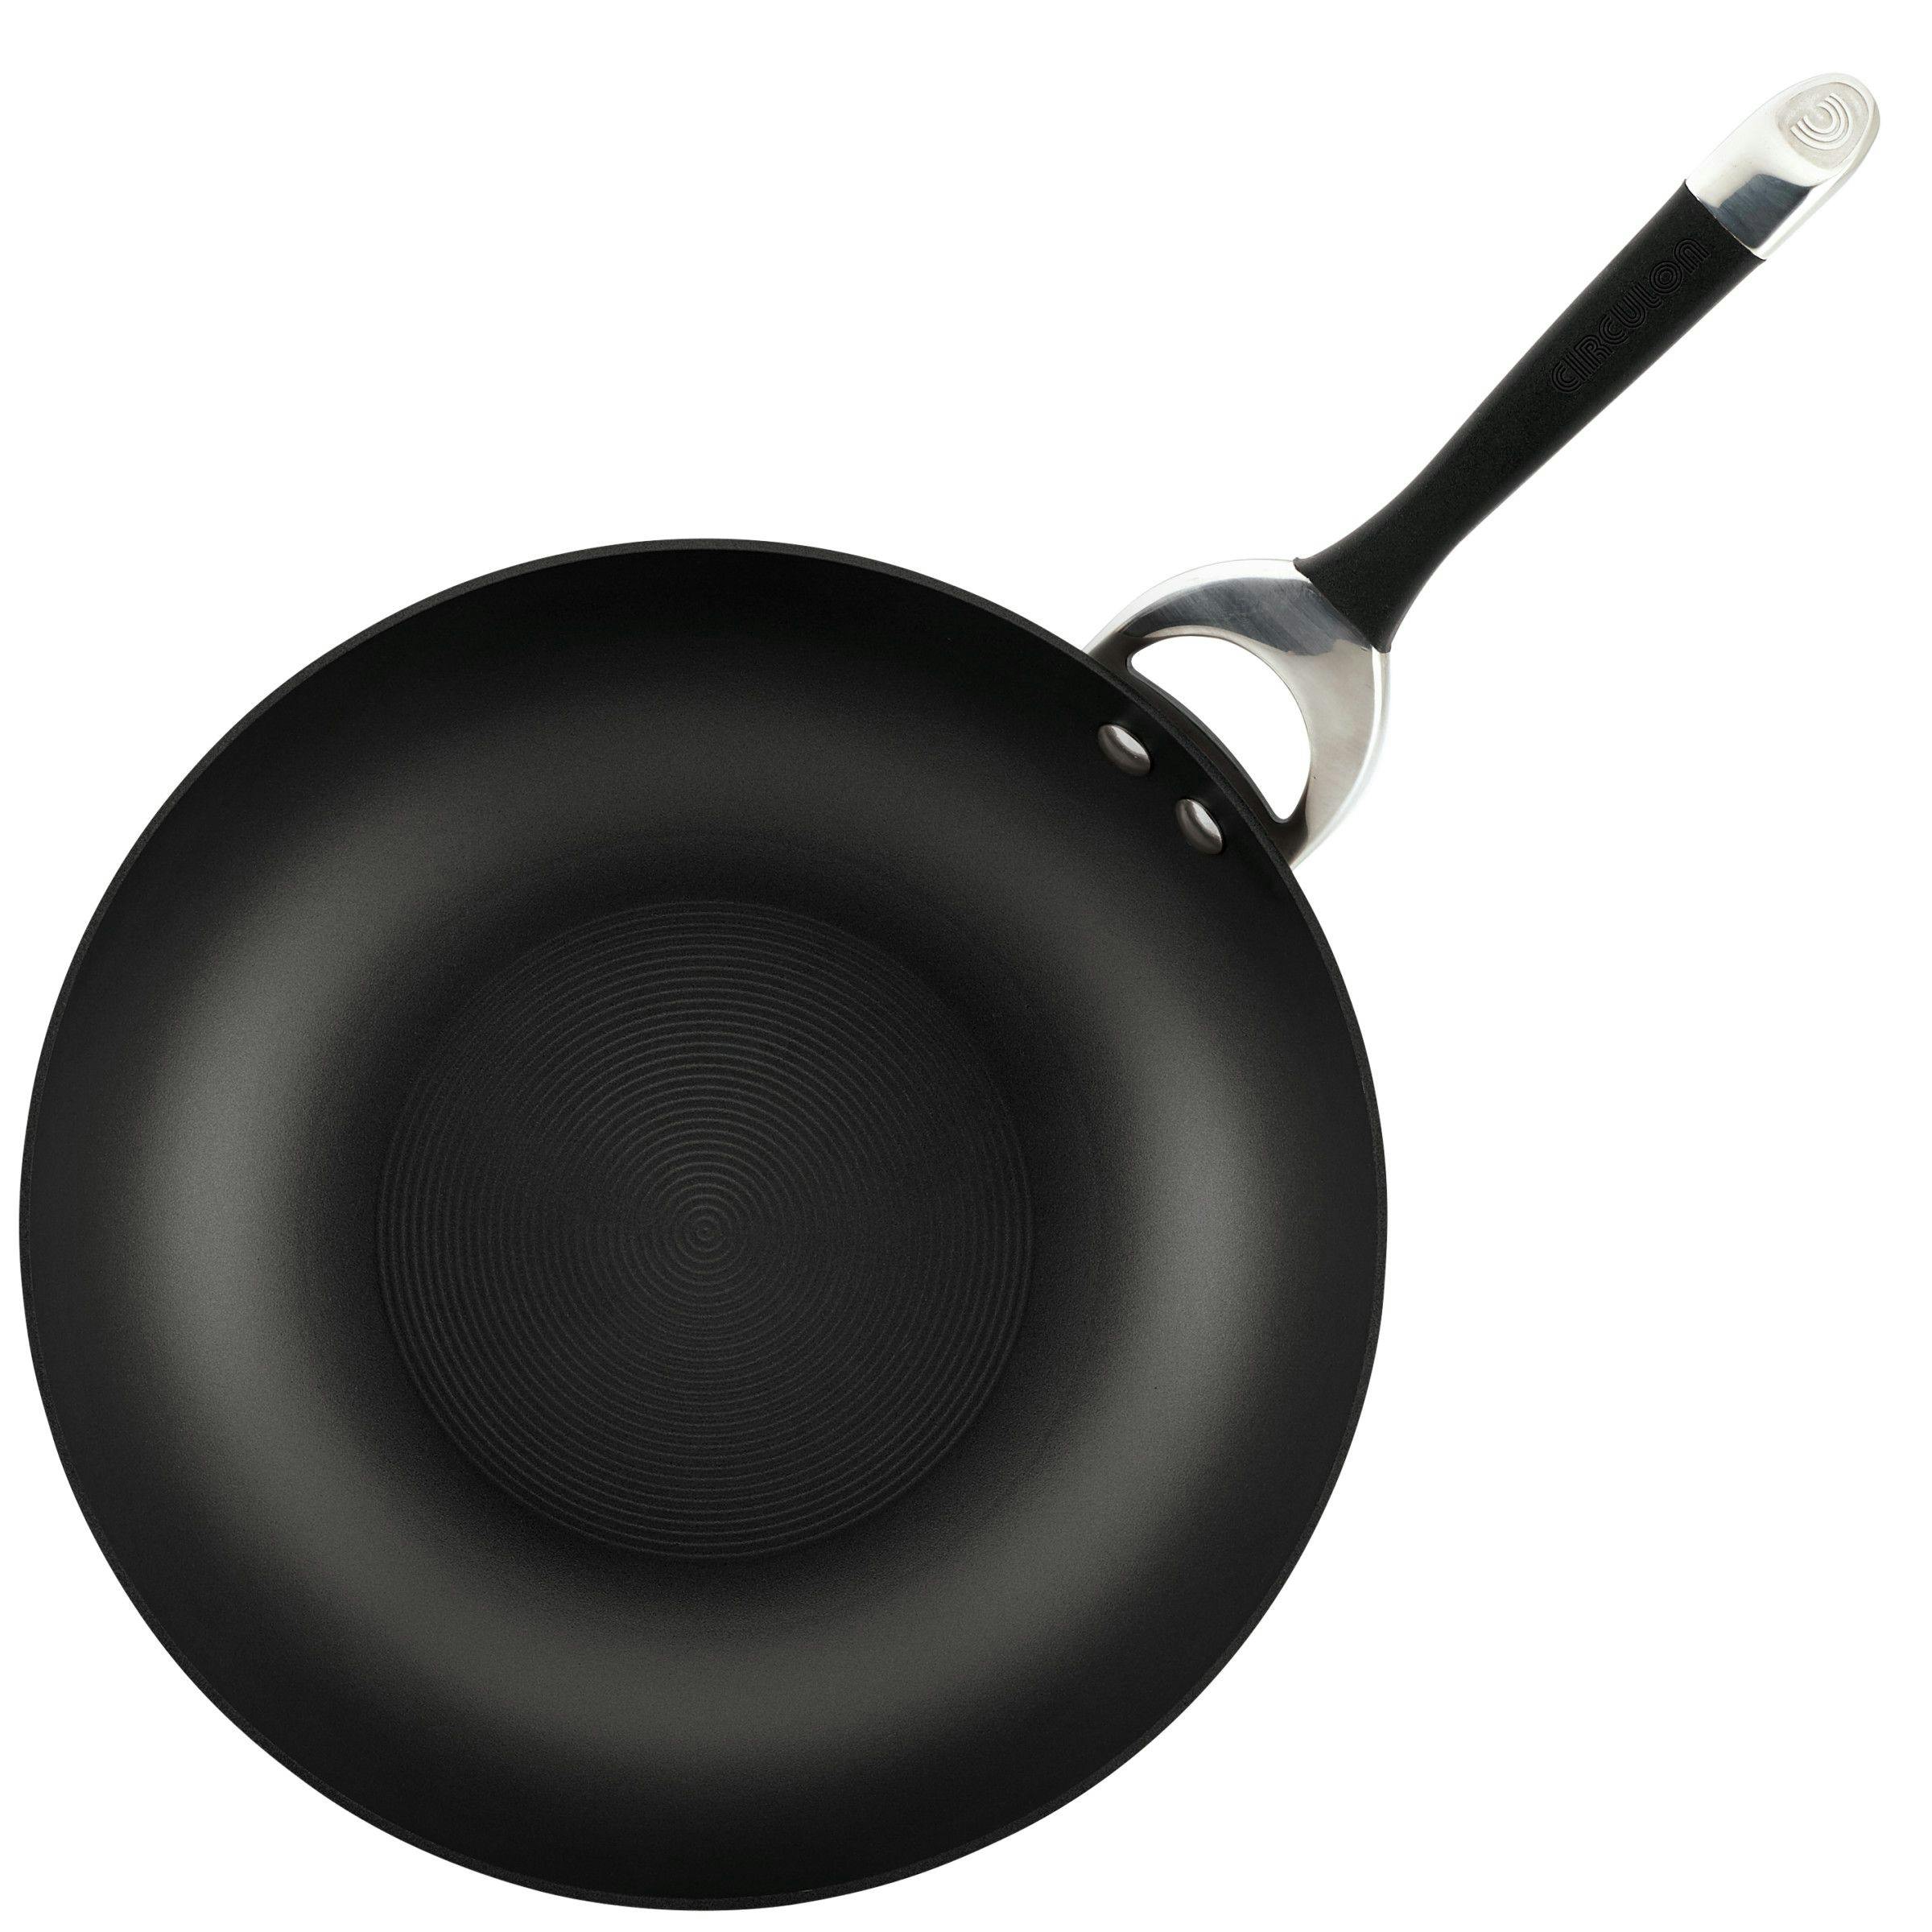 Circulon Symmetry Hard Anodized Nonstick Frying Pan Set / Skillet Set - 10  Inch and 12 Inch, Black